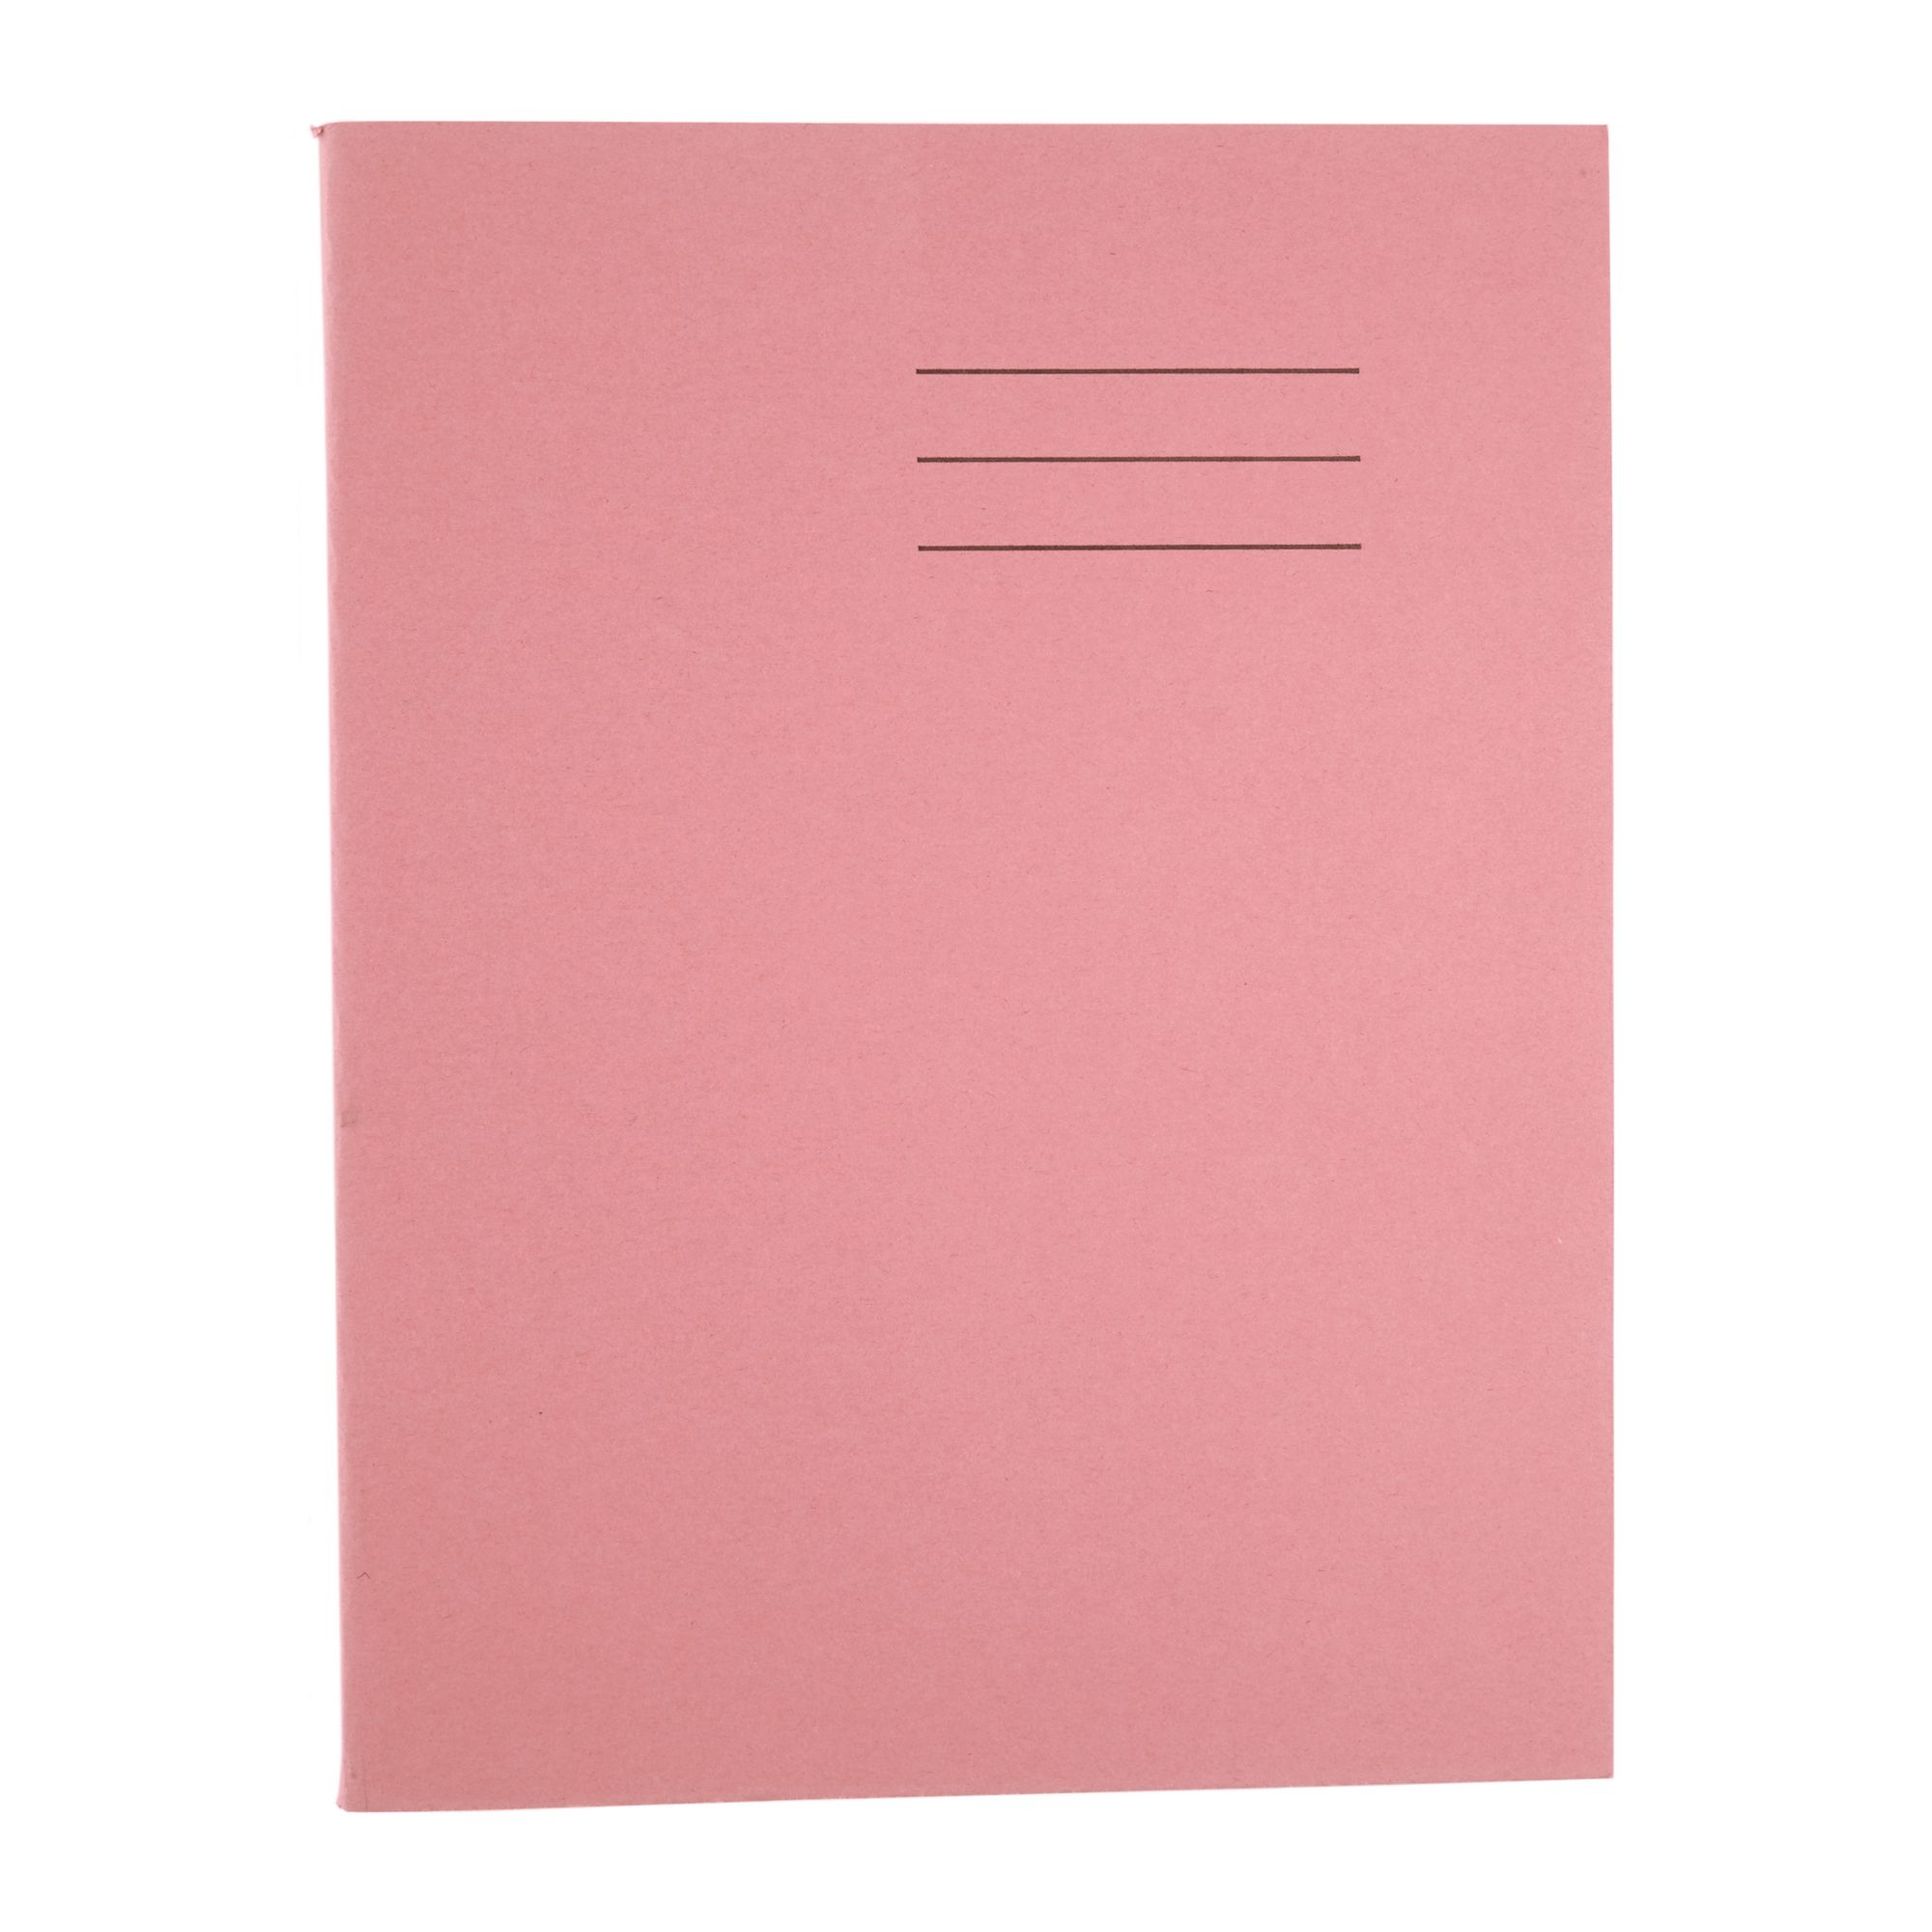 A4 Exercise Book 32 Page, Plain no Ruling, Pink - Pack of 100